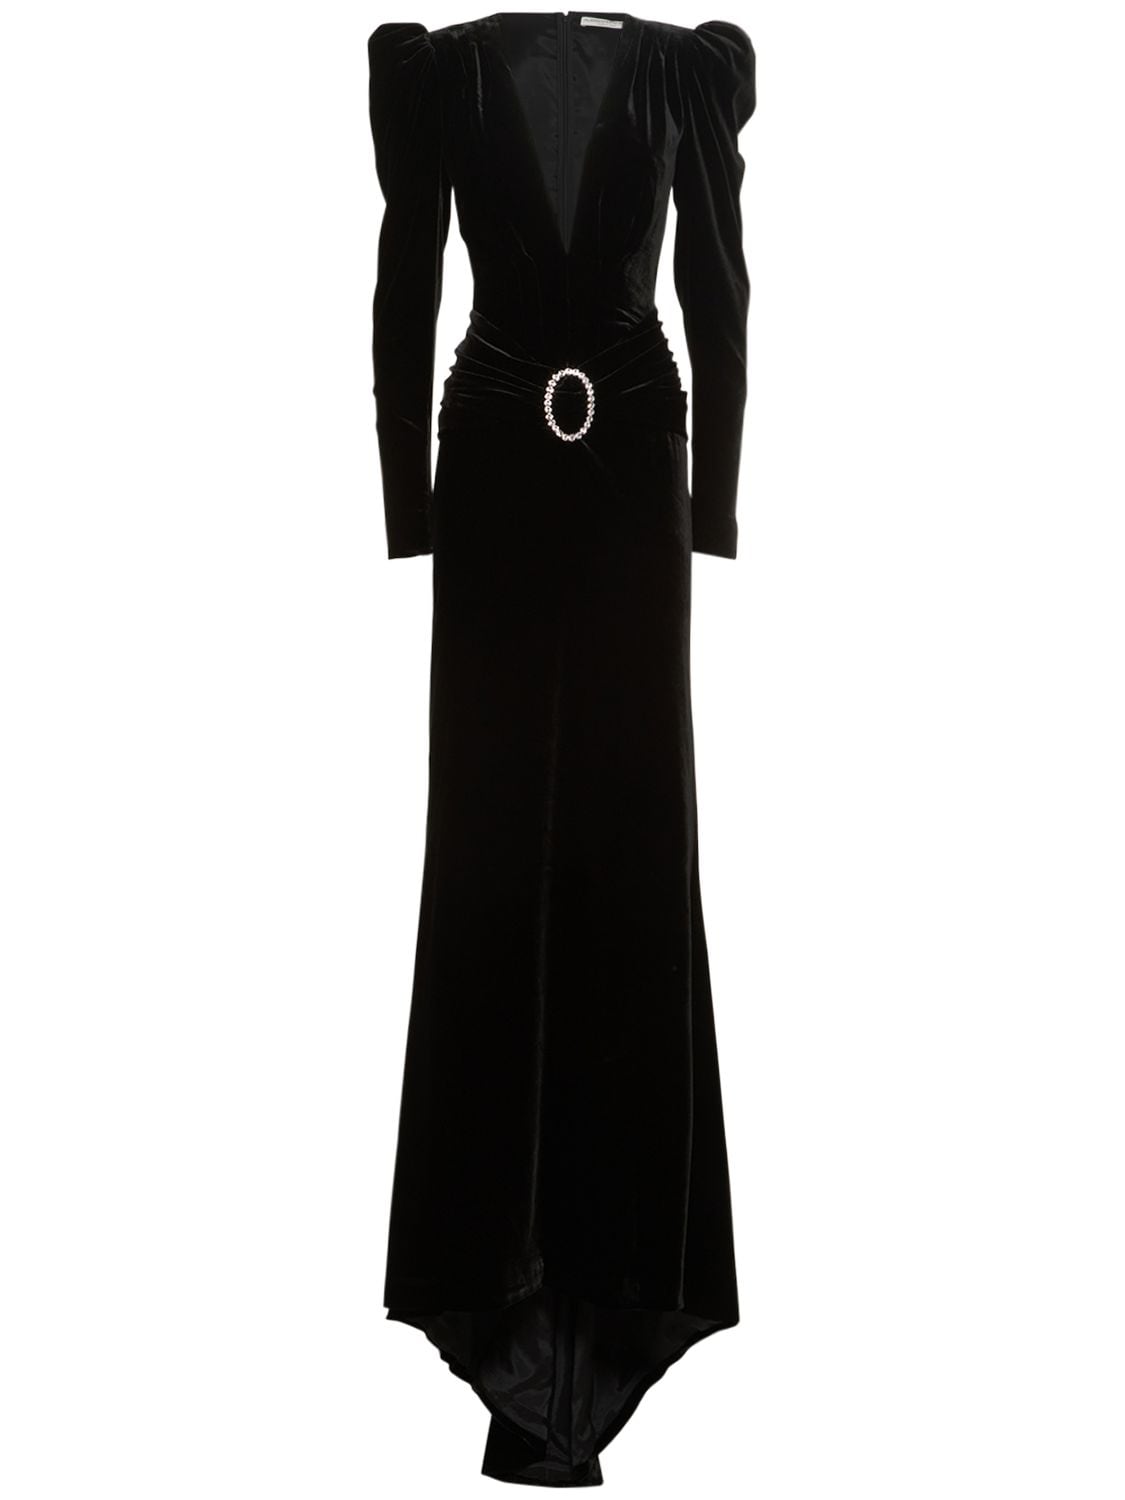 ALESSANDRA RICH Plunging V Velvet Gown W/ Crystal Buckle